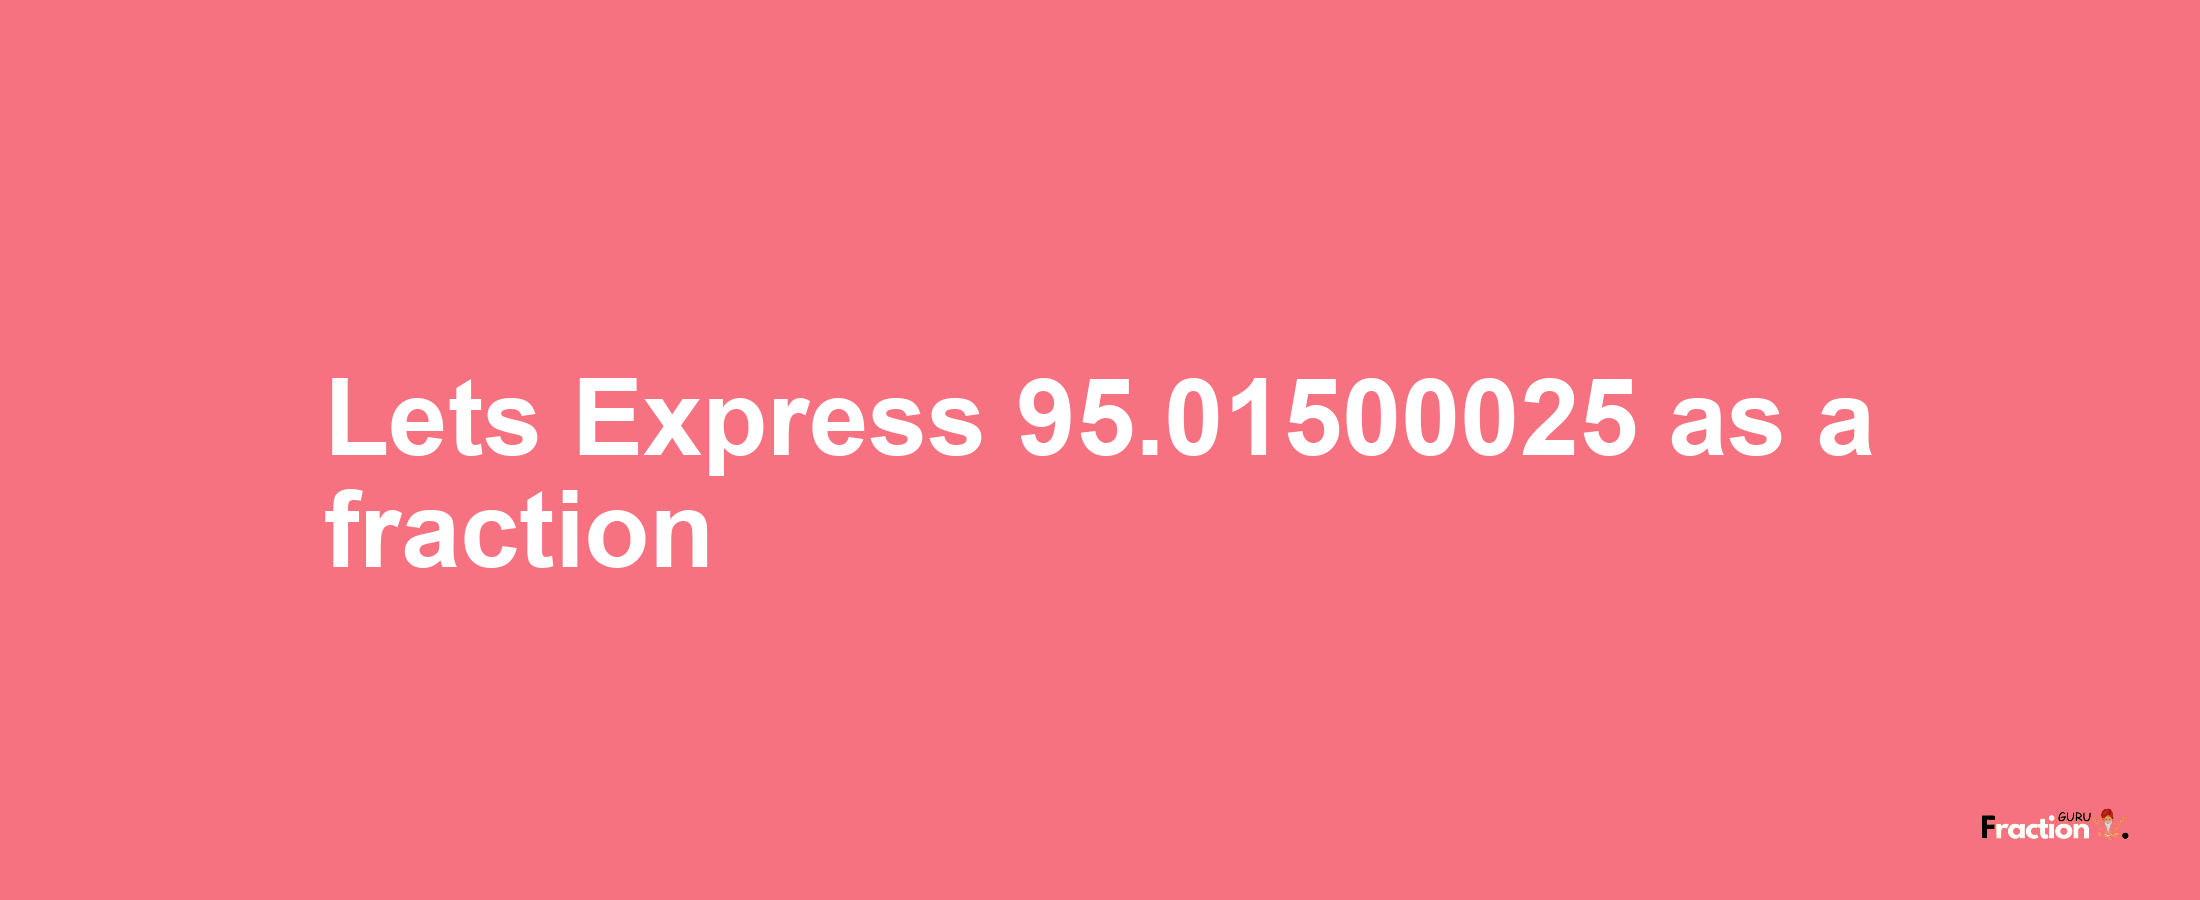 Lets Express 95.01500025 as afraction